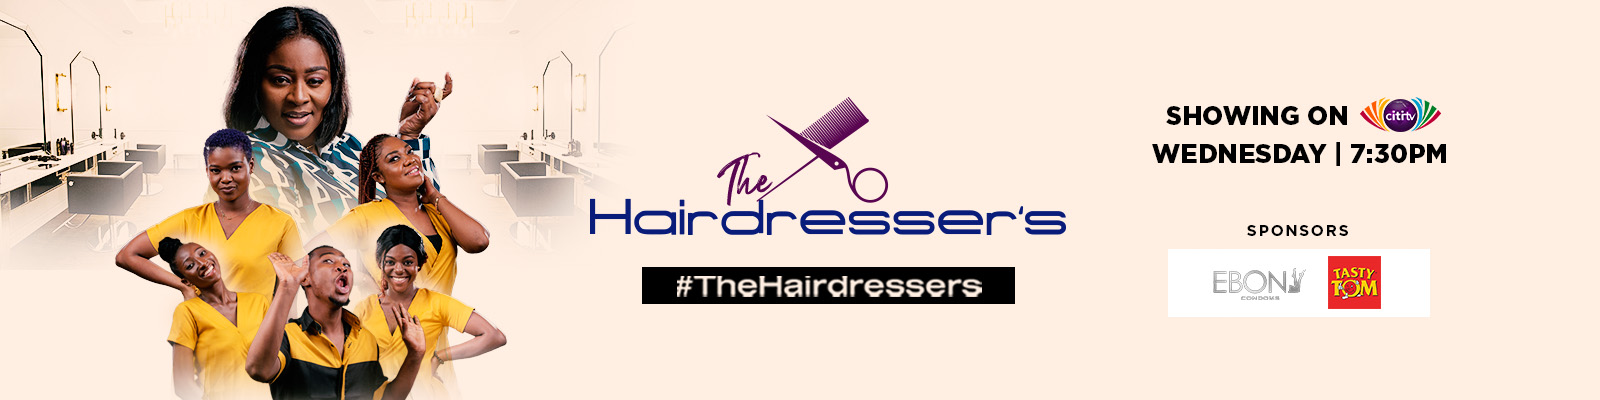 The Hairdressers 1600 x 400 1 copy